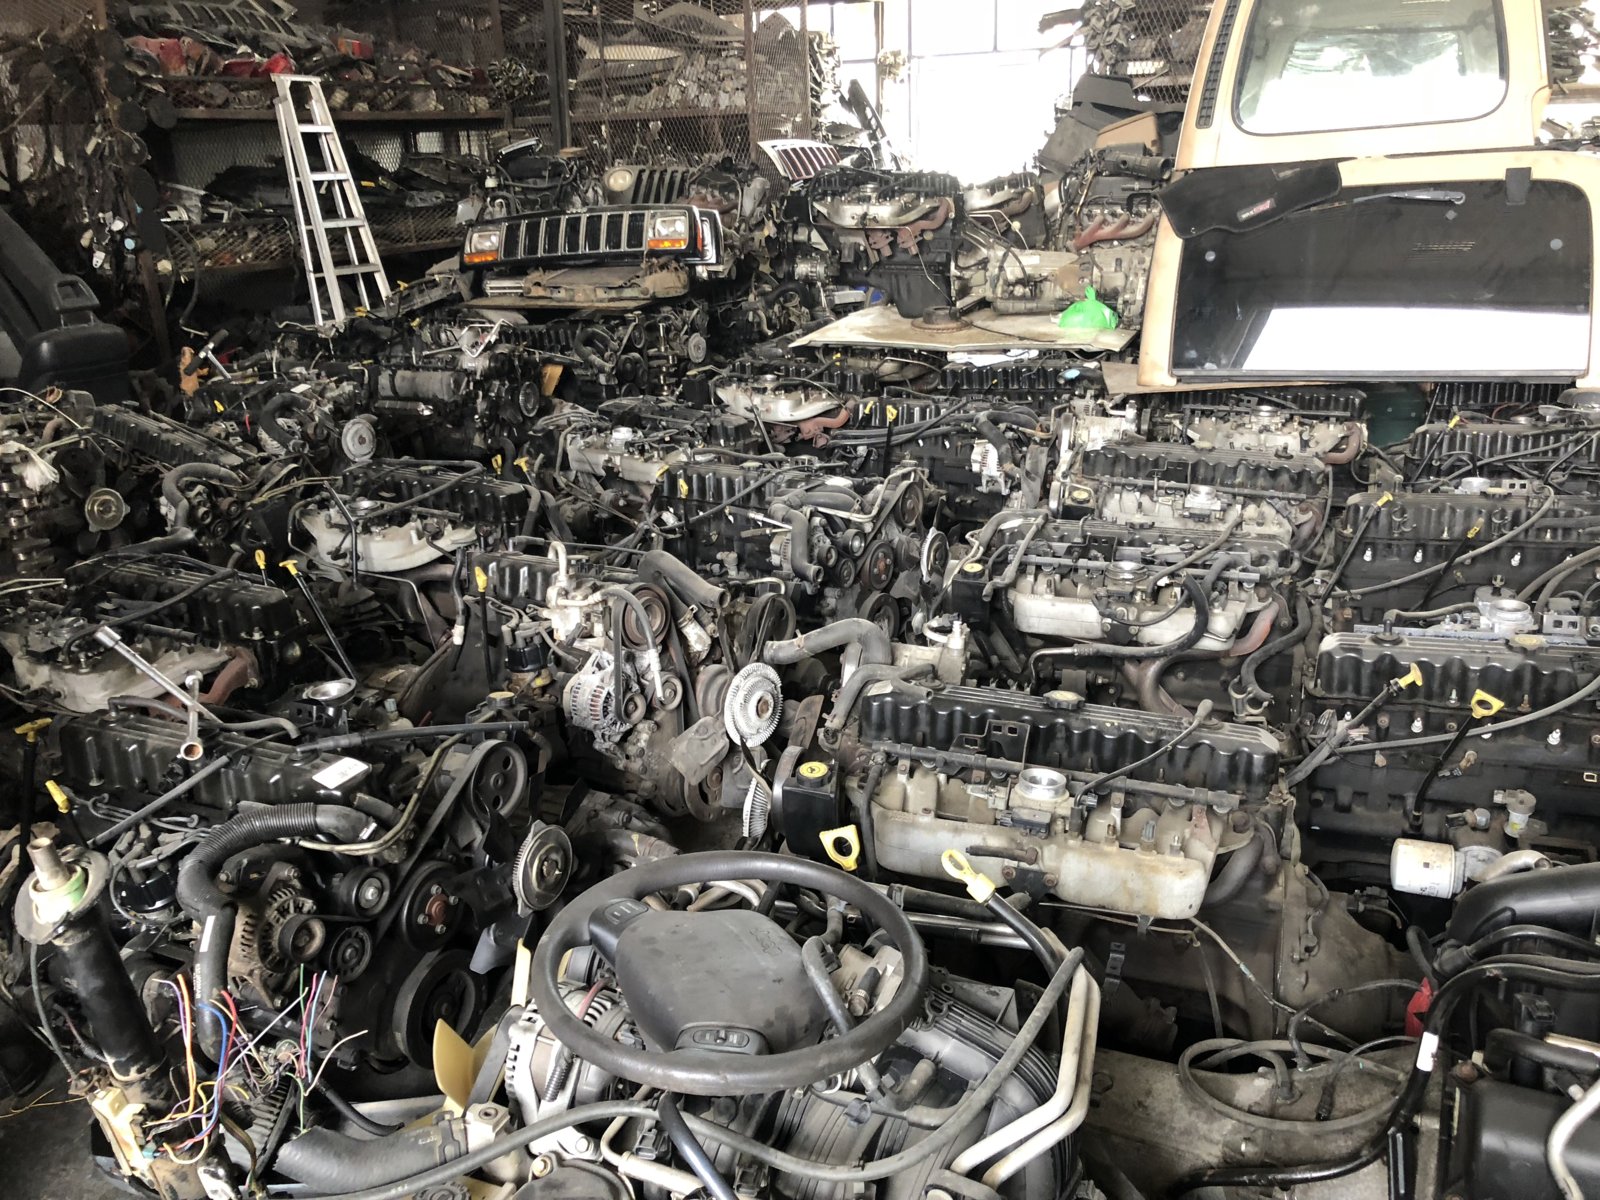 Some slutty porn at the Jeep junk yard, hope this doesn't offend | Jeep  Wrangler TJ Forum